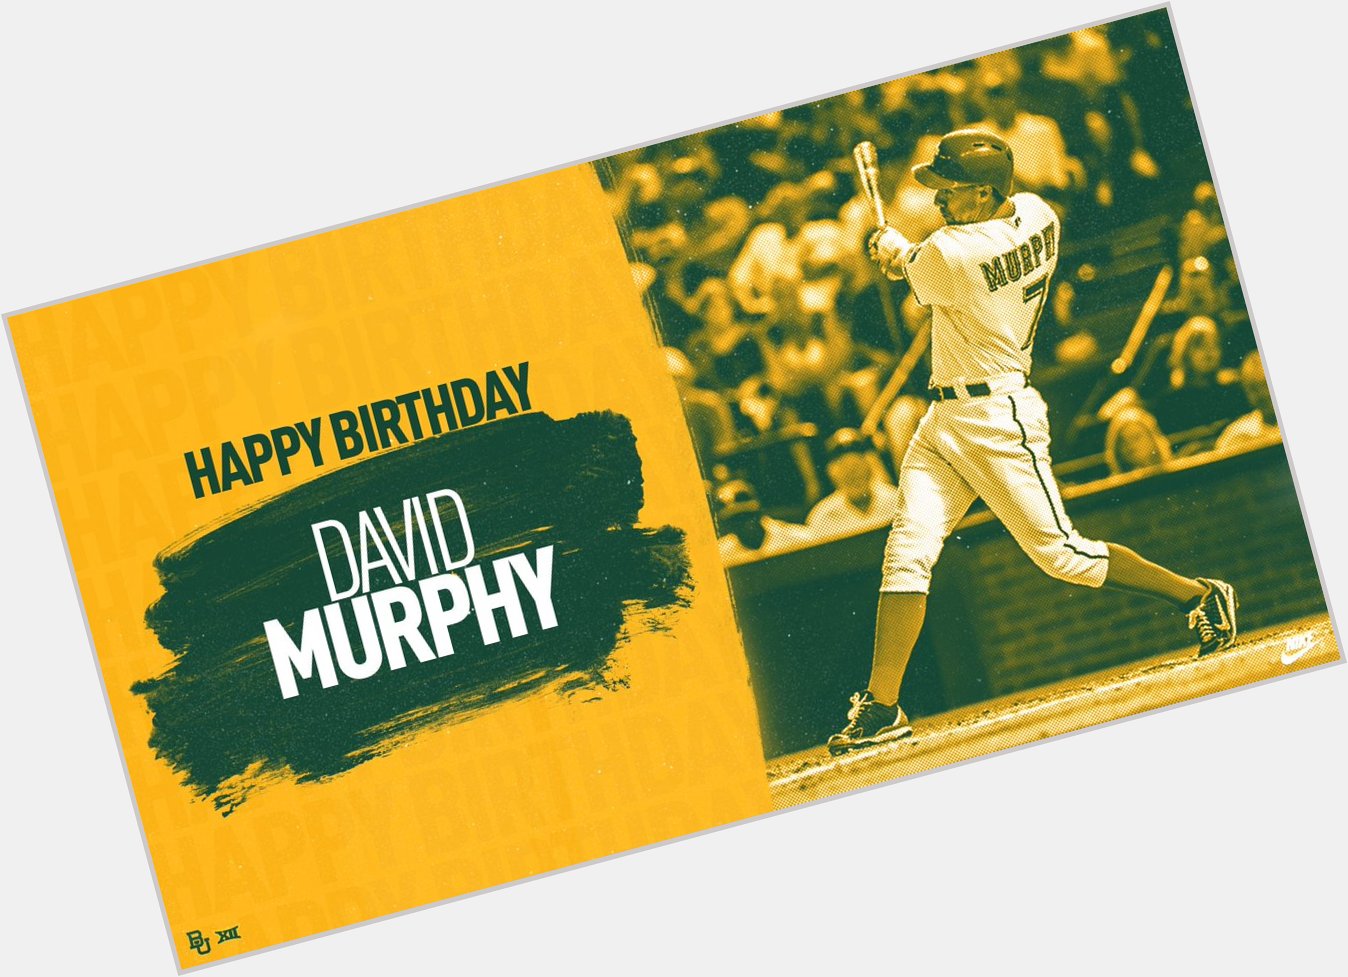  Happy Birthday to David Murphy!
 
Hope it s a great one!  